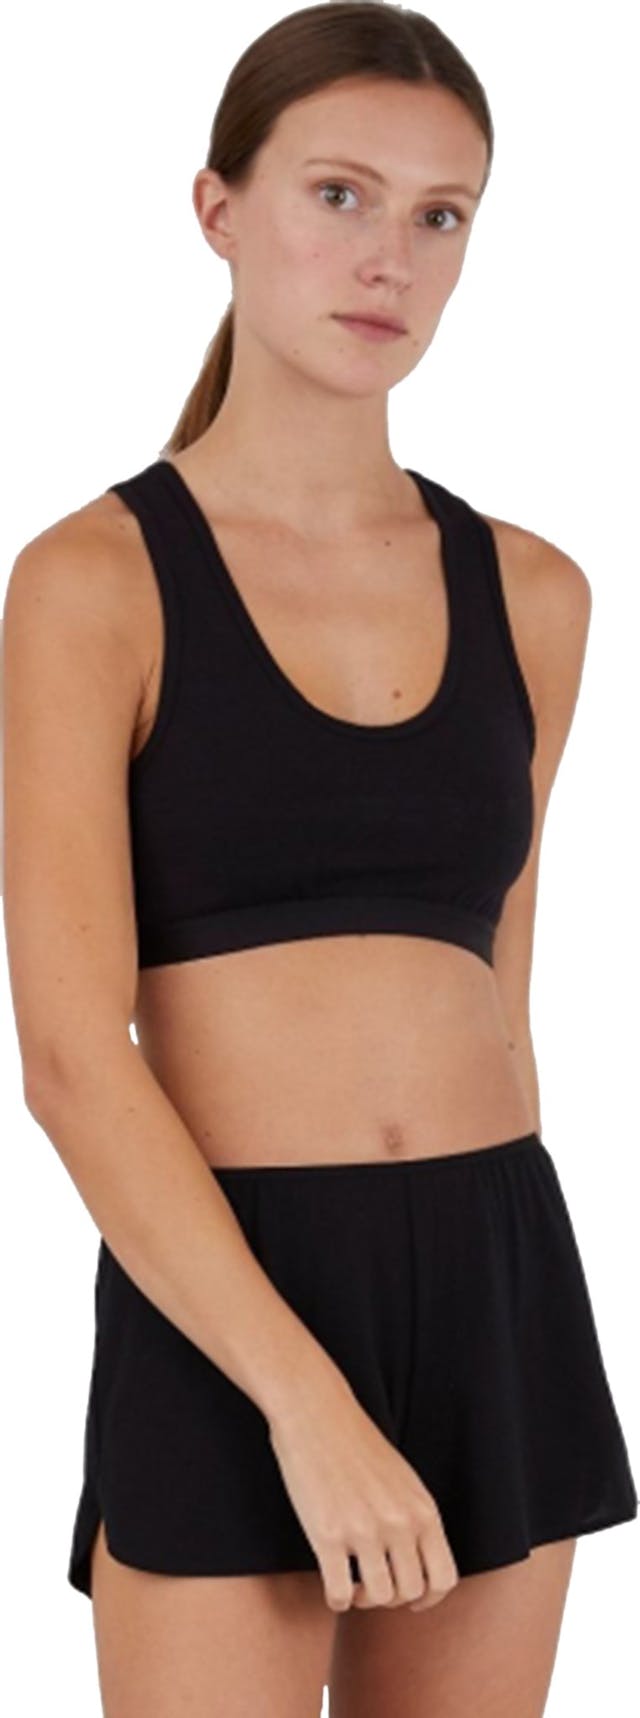 Product image for Stretch Cotton Crop Top - Women's